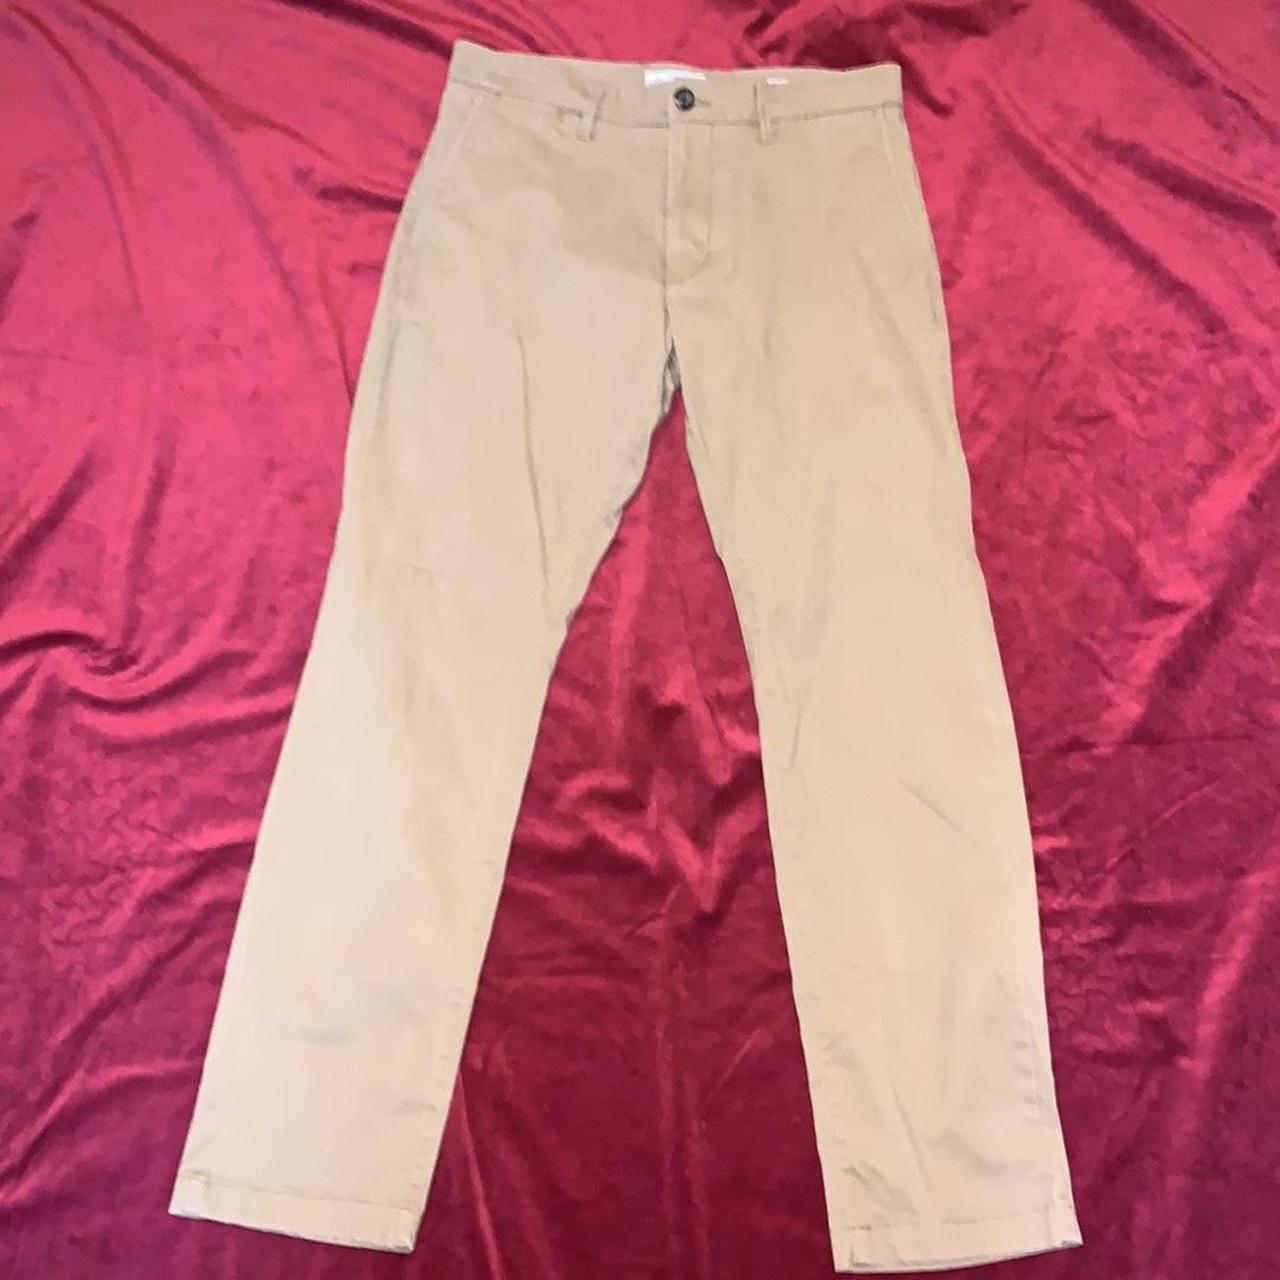  Goodfellow & Co Men's Slim Fit Hennepin Chino Pants